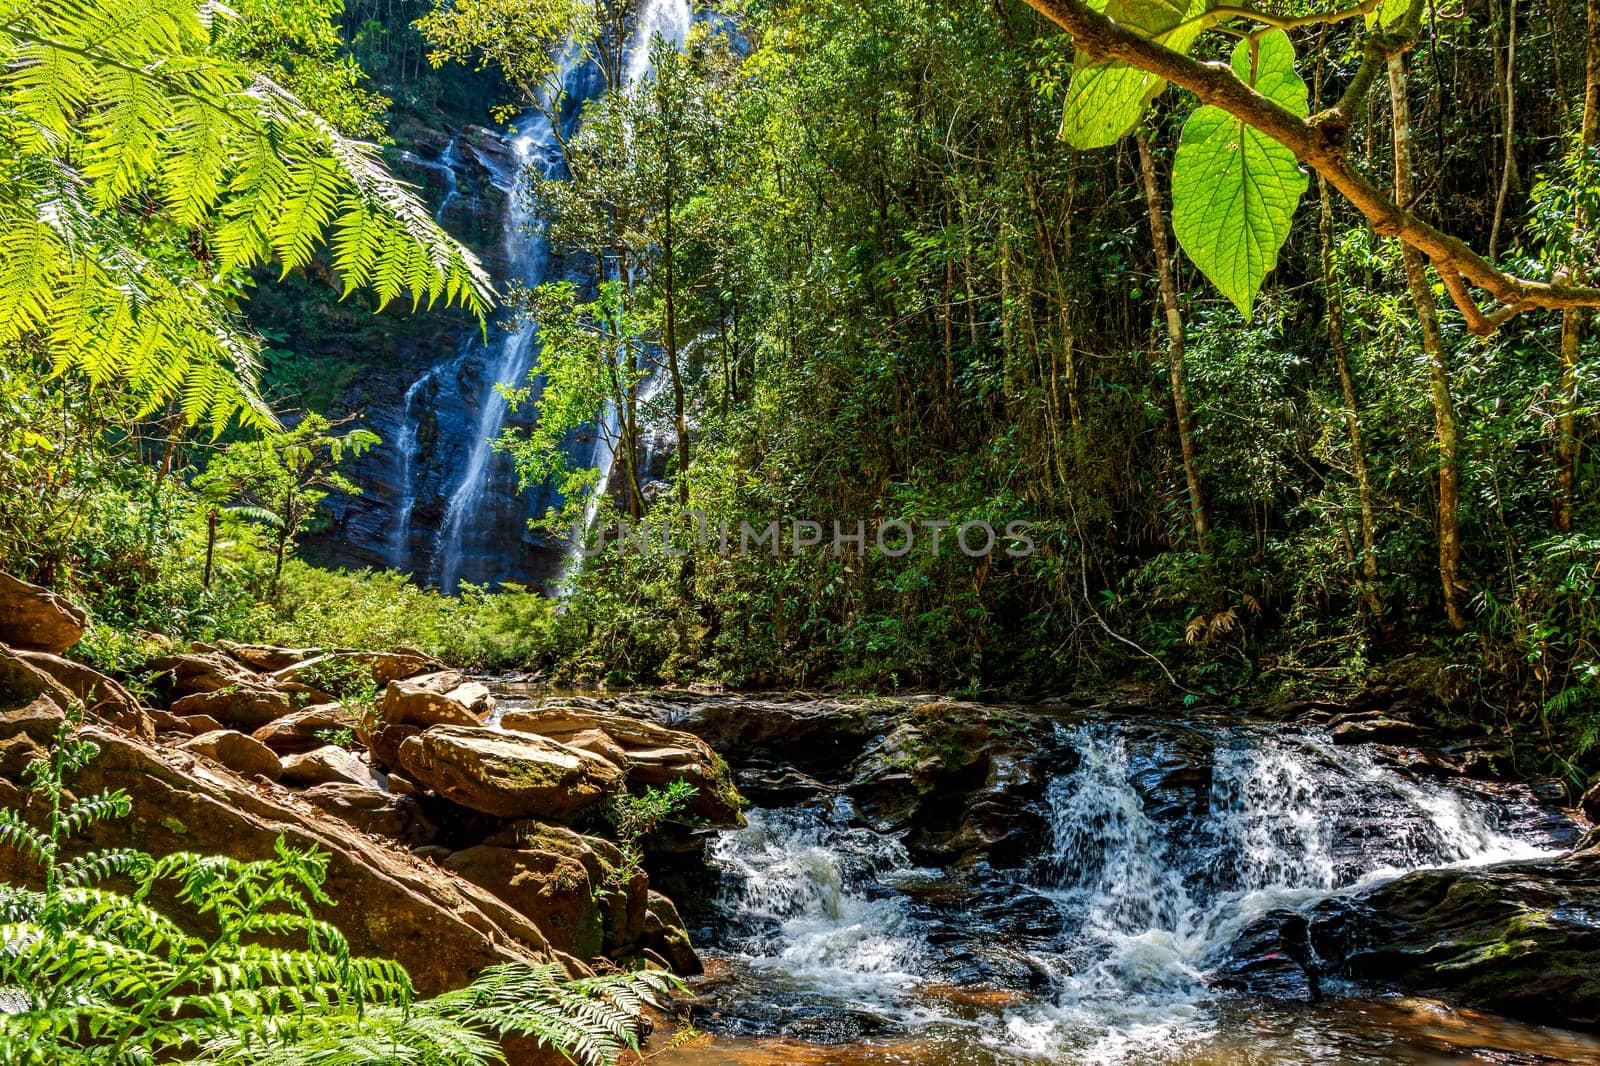 Rivers and waterfalls through dense forest vegetation in the state of Minas Gerais, Brazil